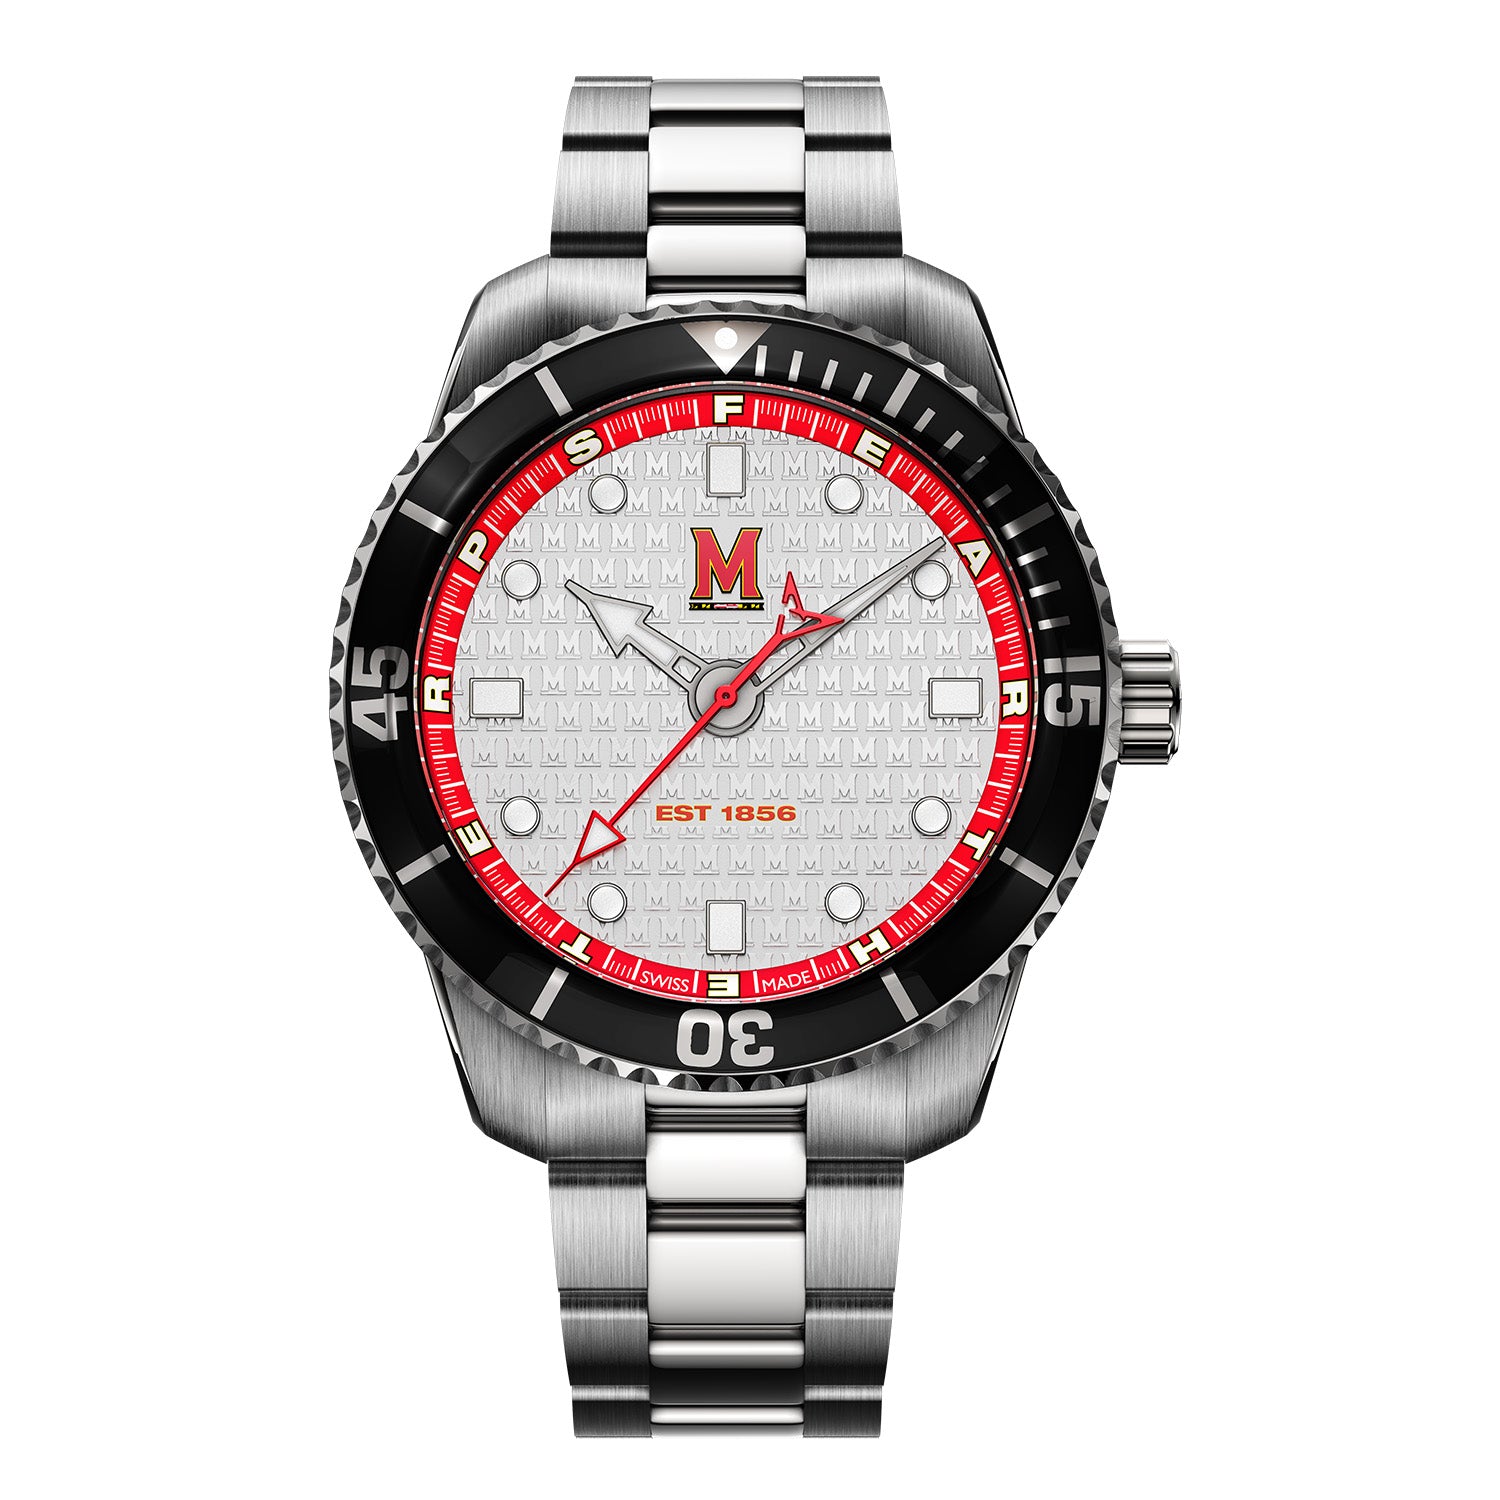 University of Maryland Swiss made automatic watch. Front view.